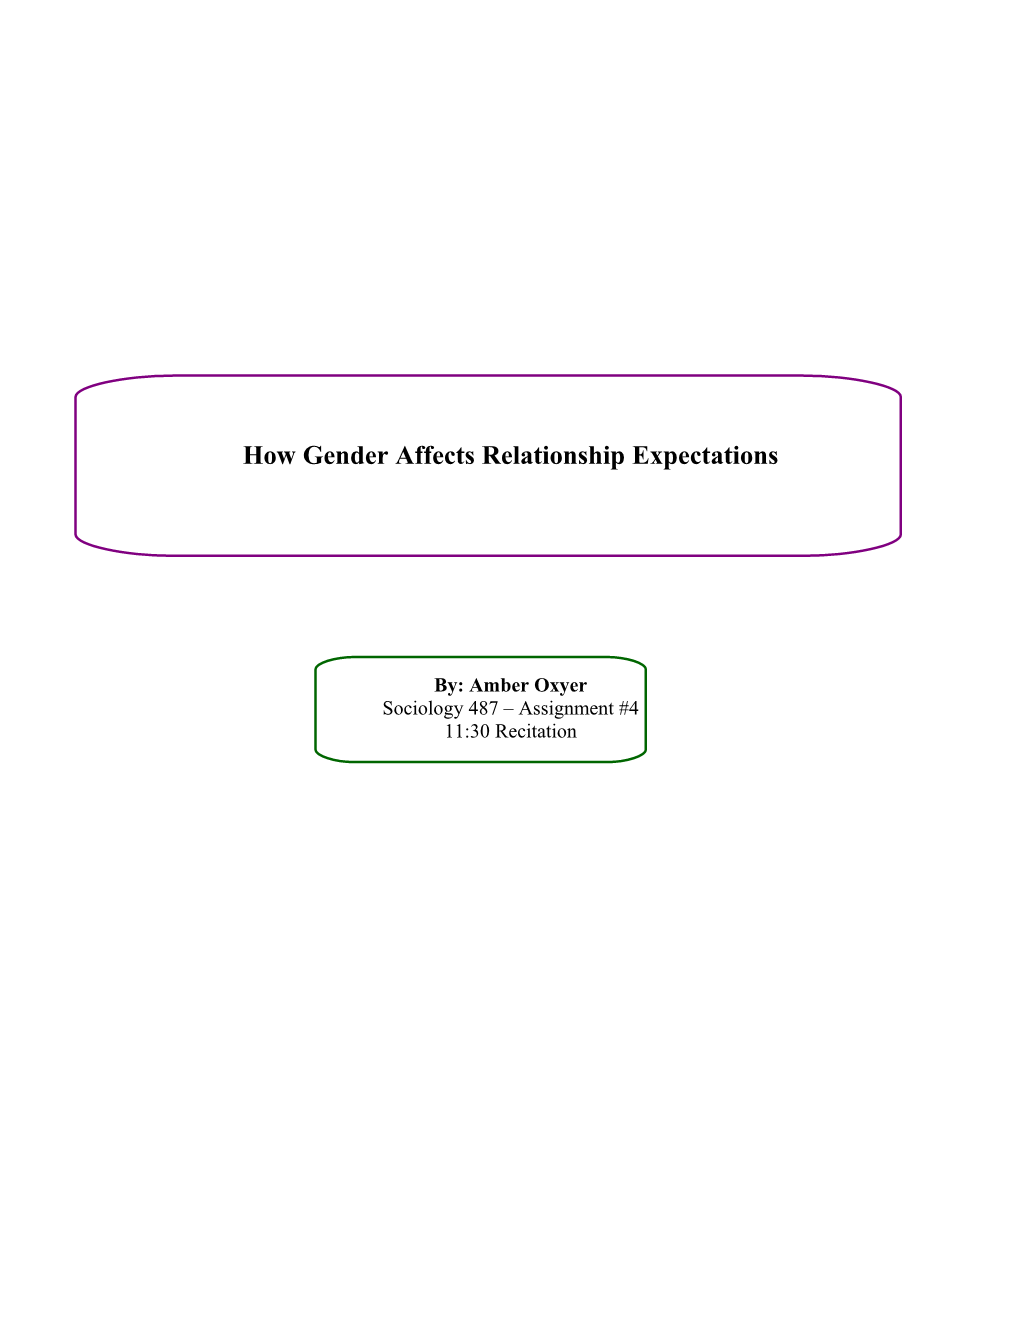 How Gender Affects Relationship Expectations